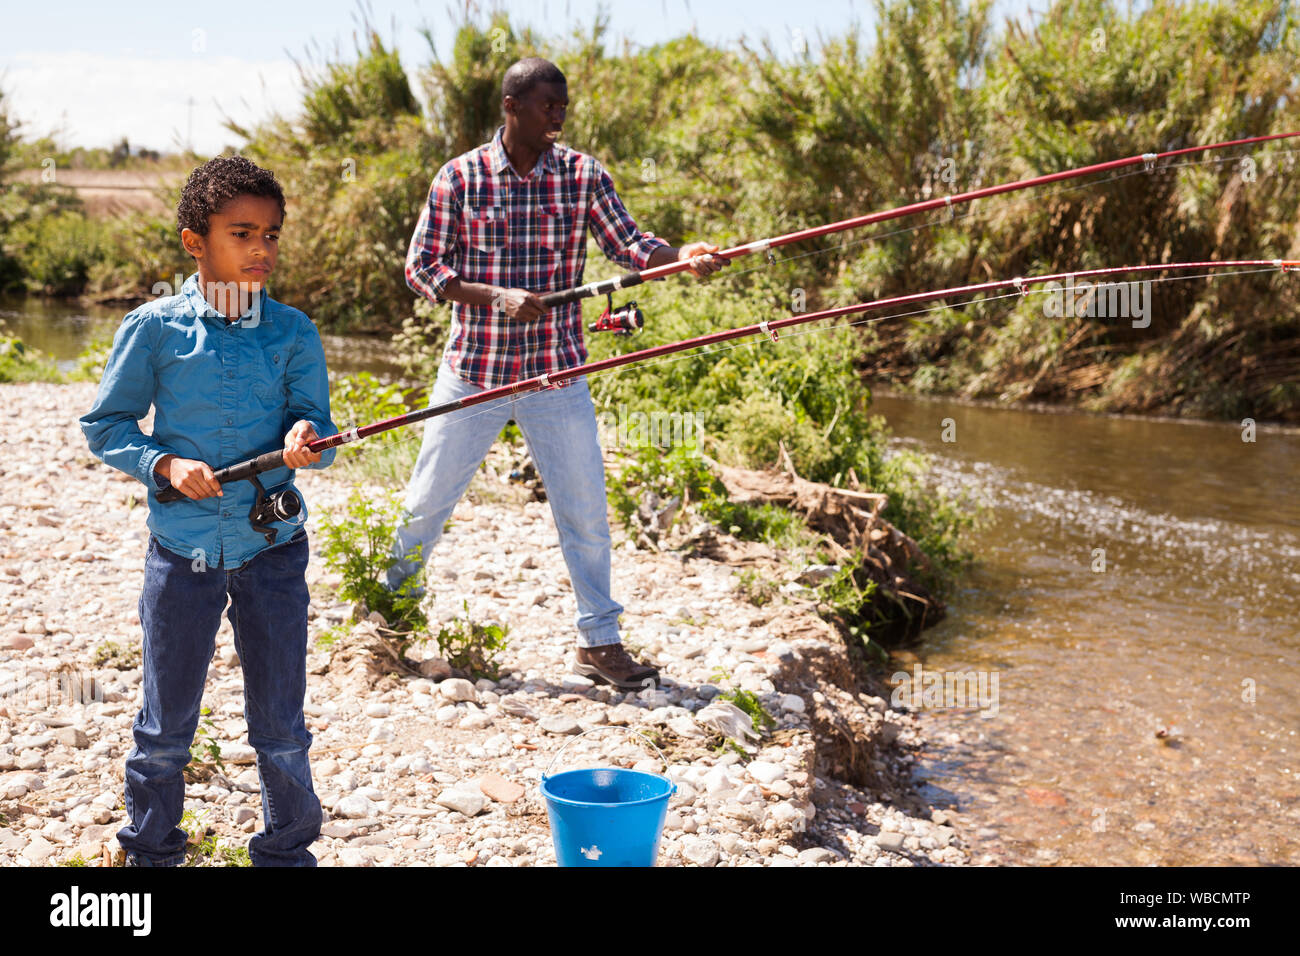 Afro boy holding fishing rod and pulling fish from river Stock Photo